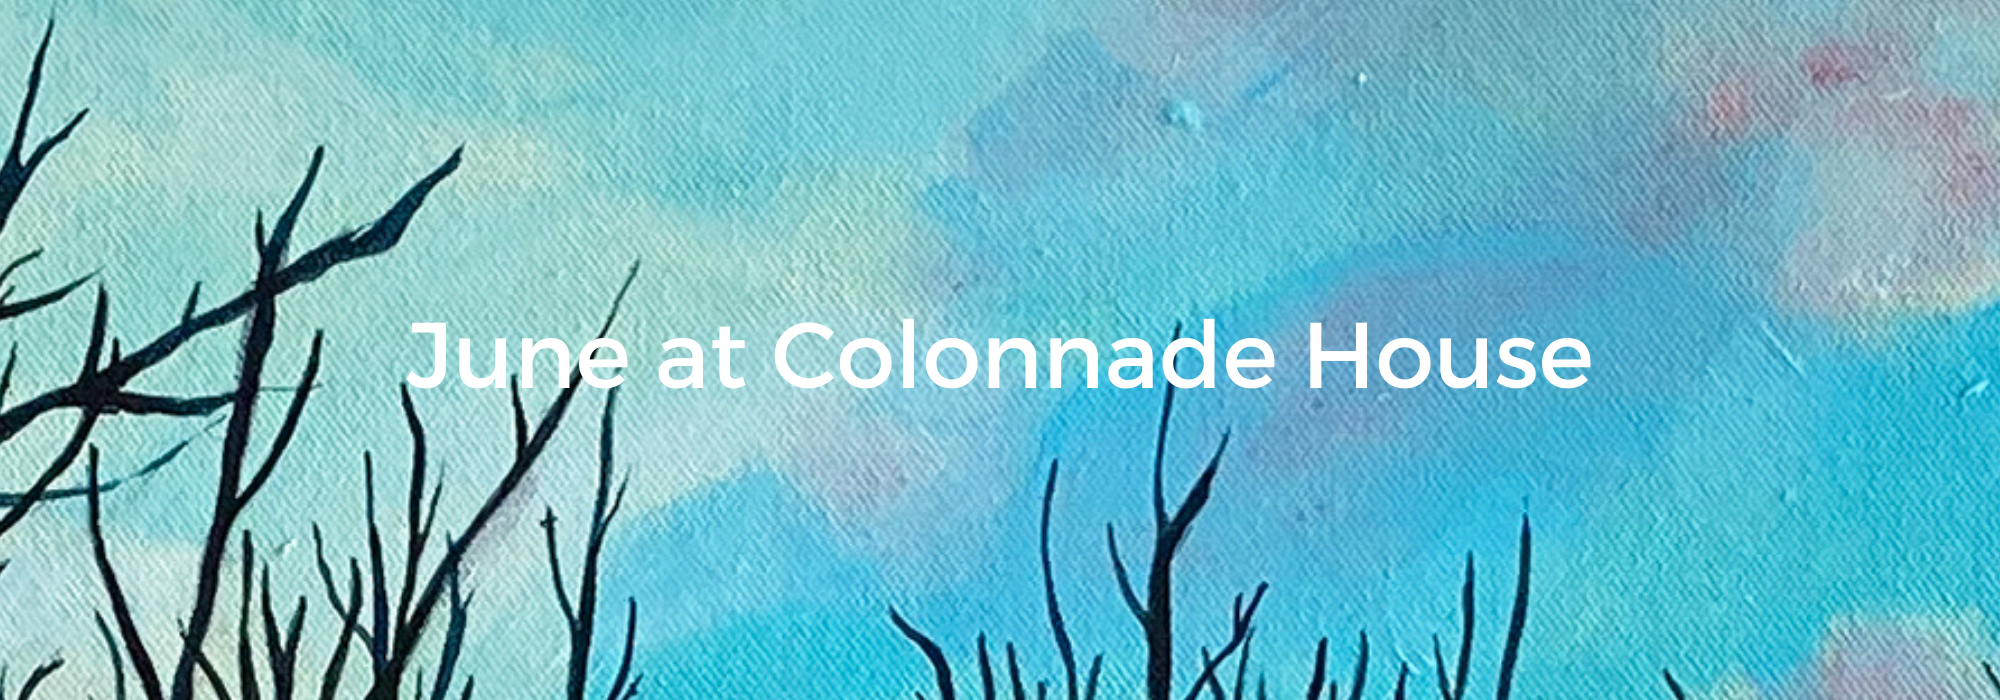 June at Colonnade House